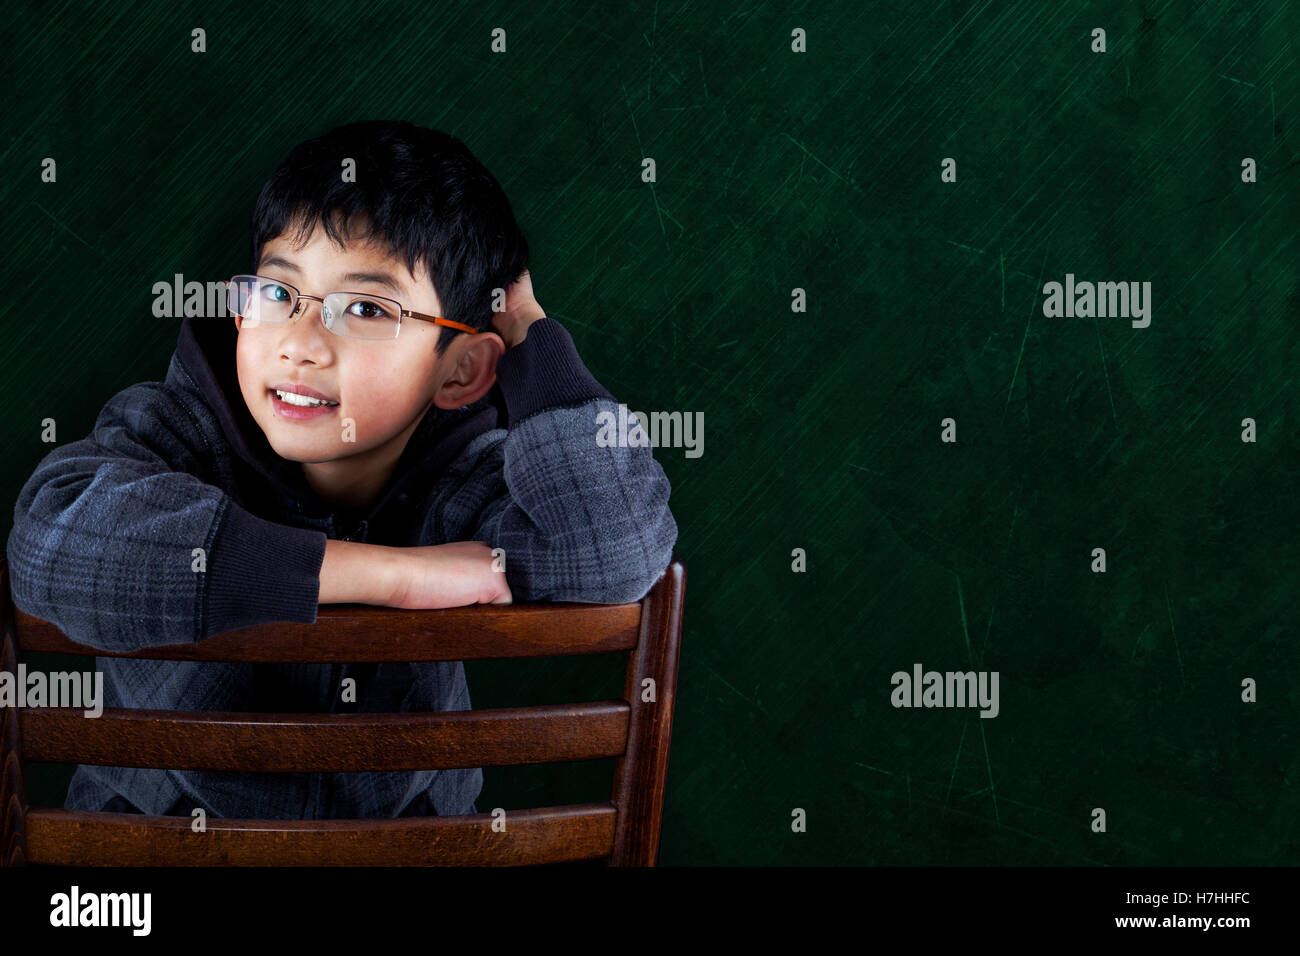 Smart Asian boy sitting on classroom chair with chalkboard background and copy space. Stock Photo